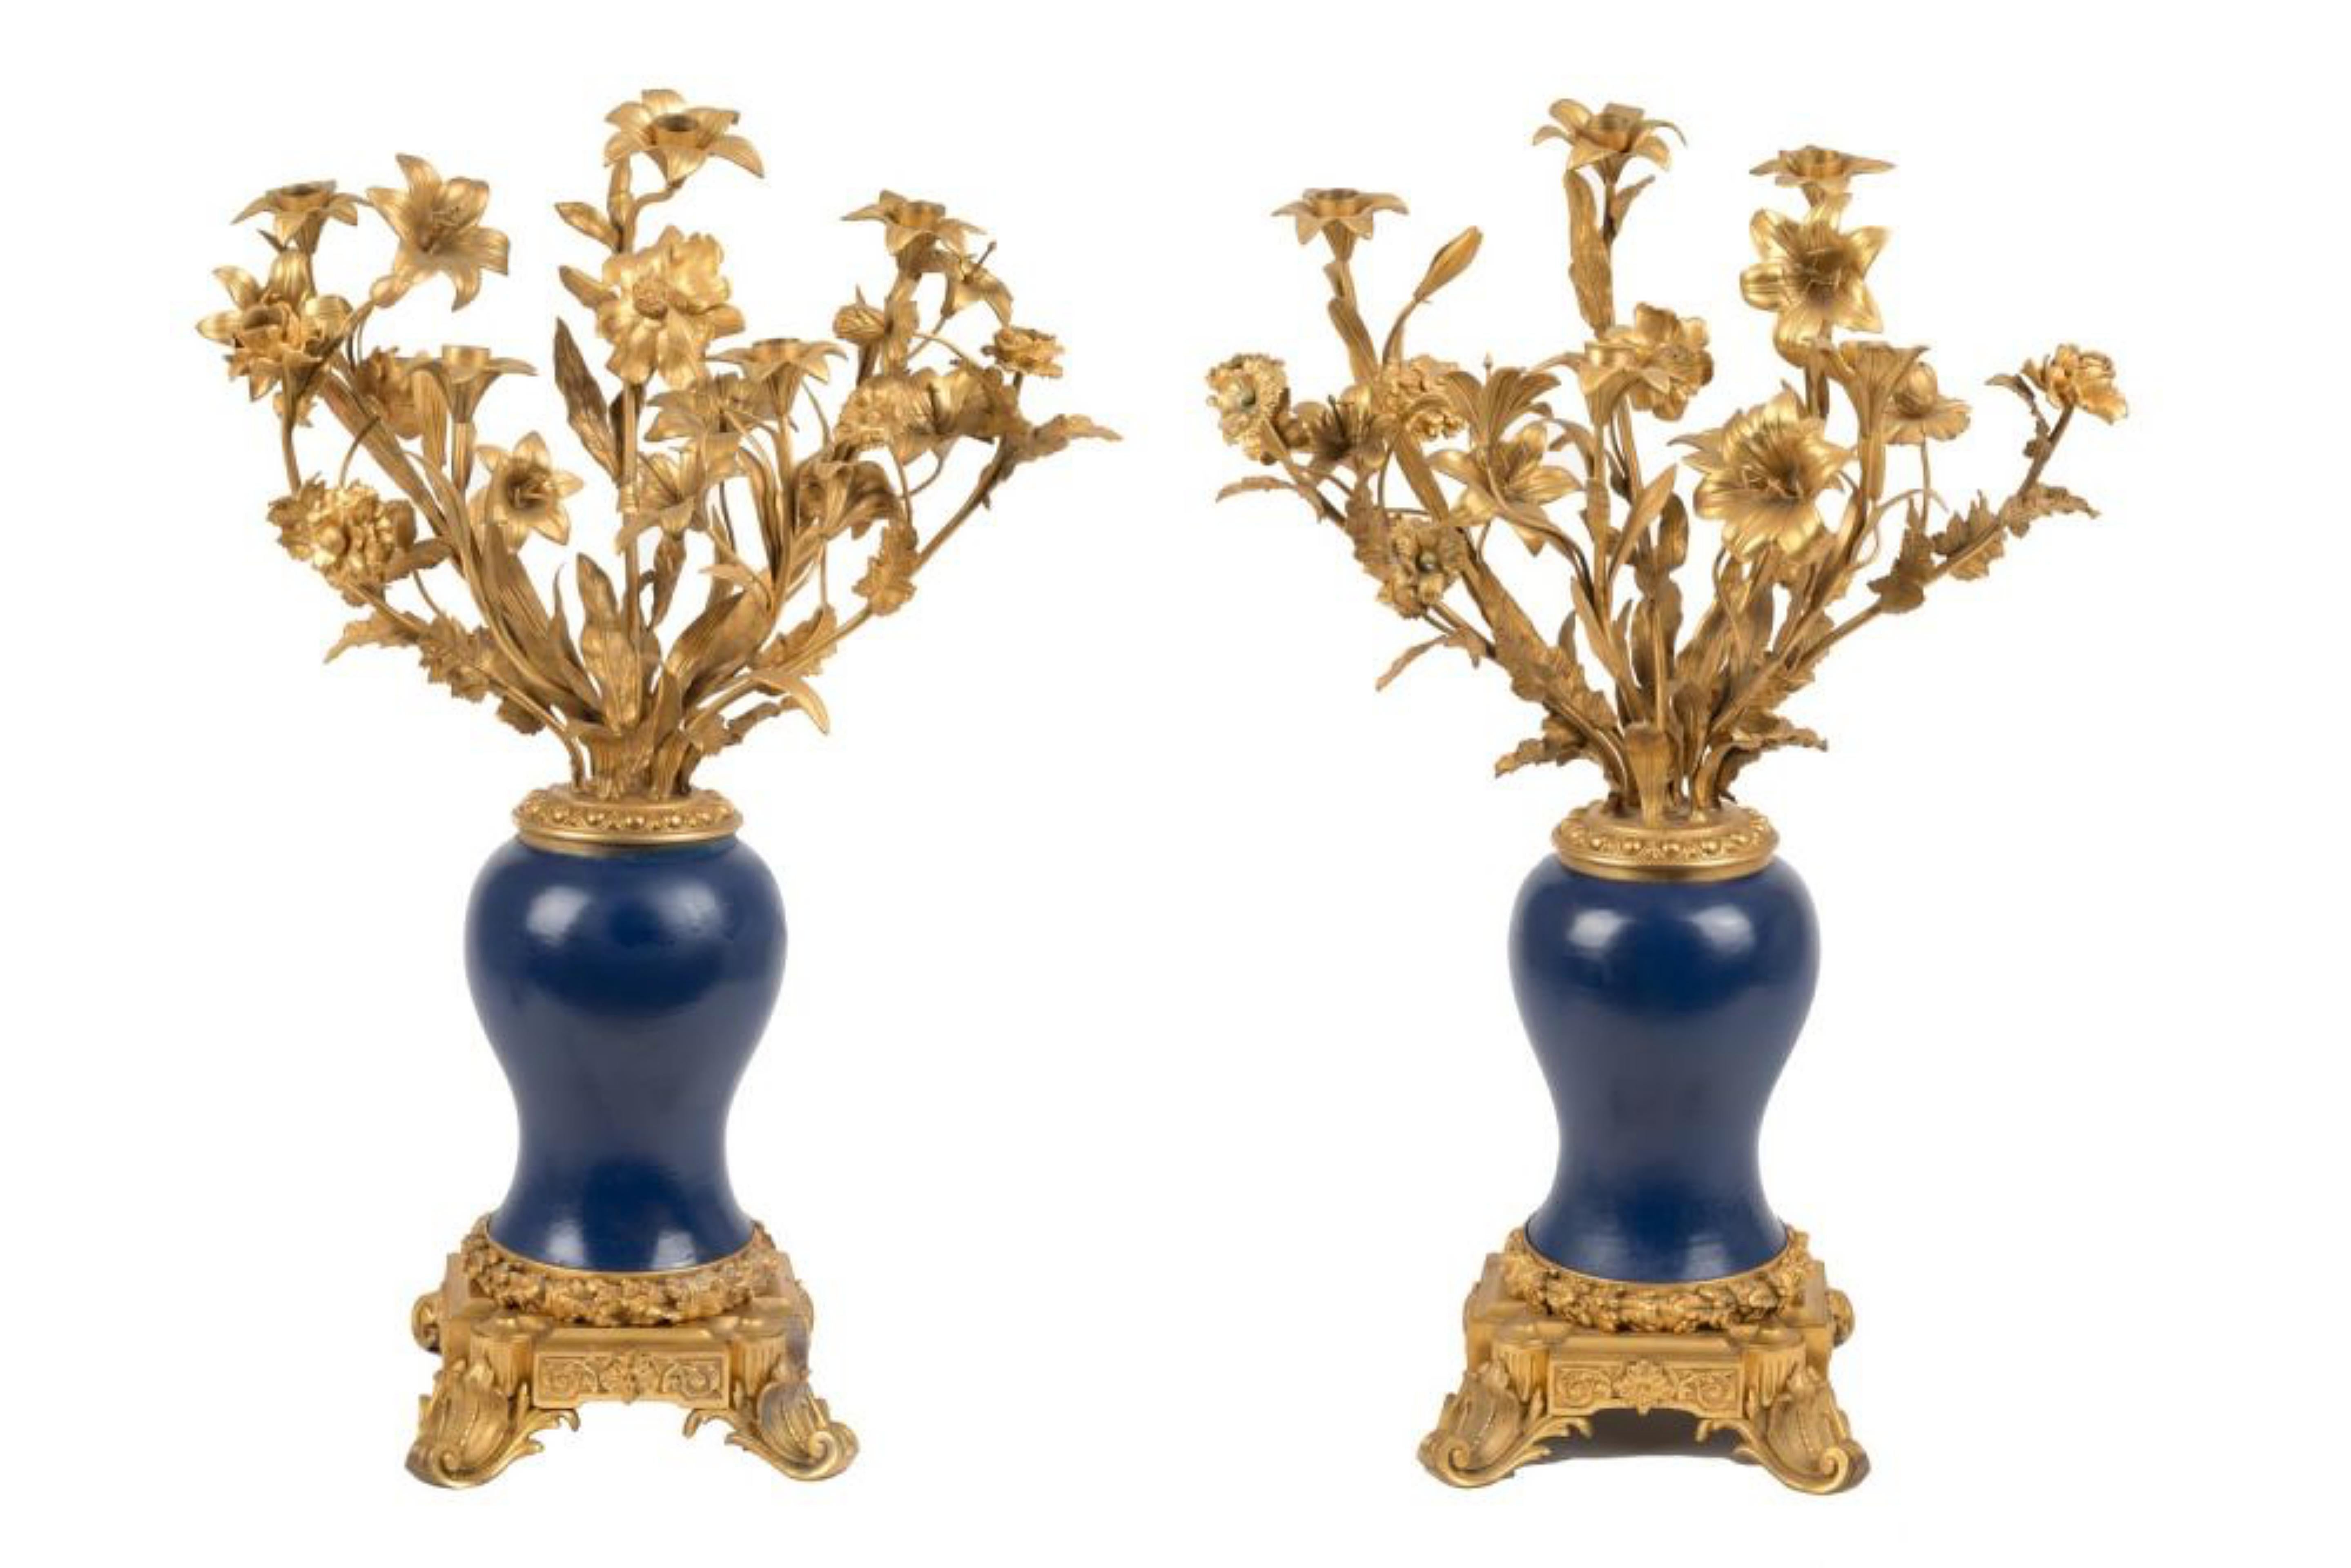 Magnificent Pair of 19th Century French Candelabra For Sale 3